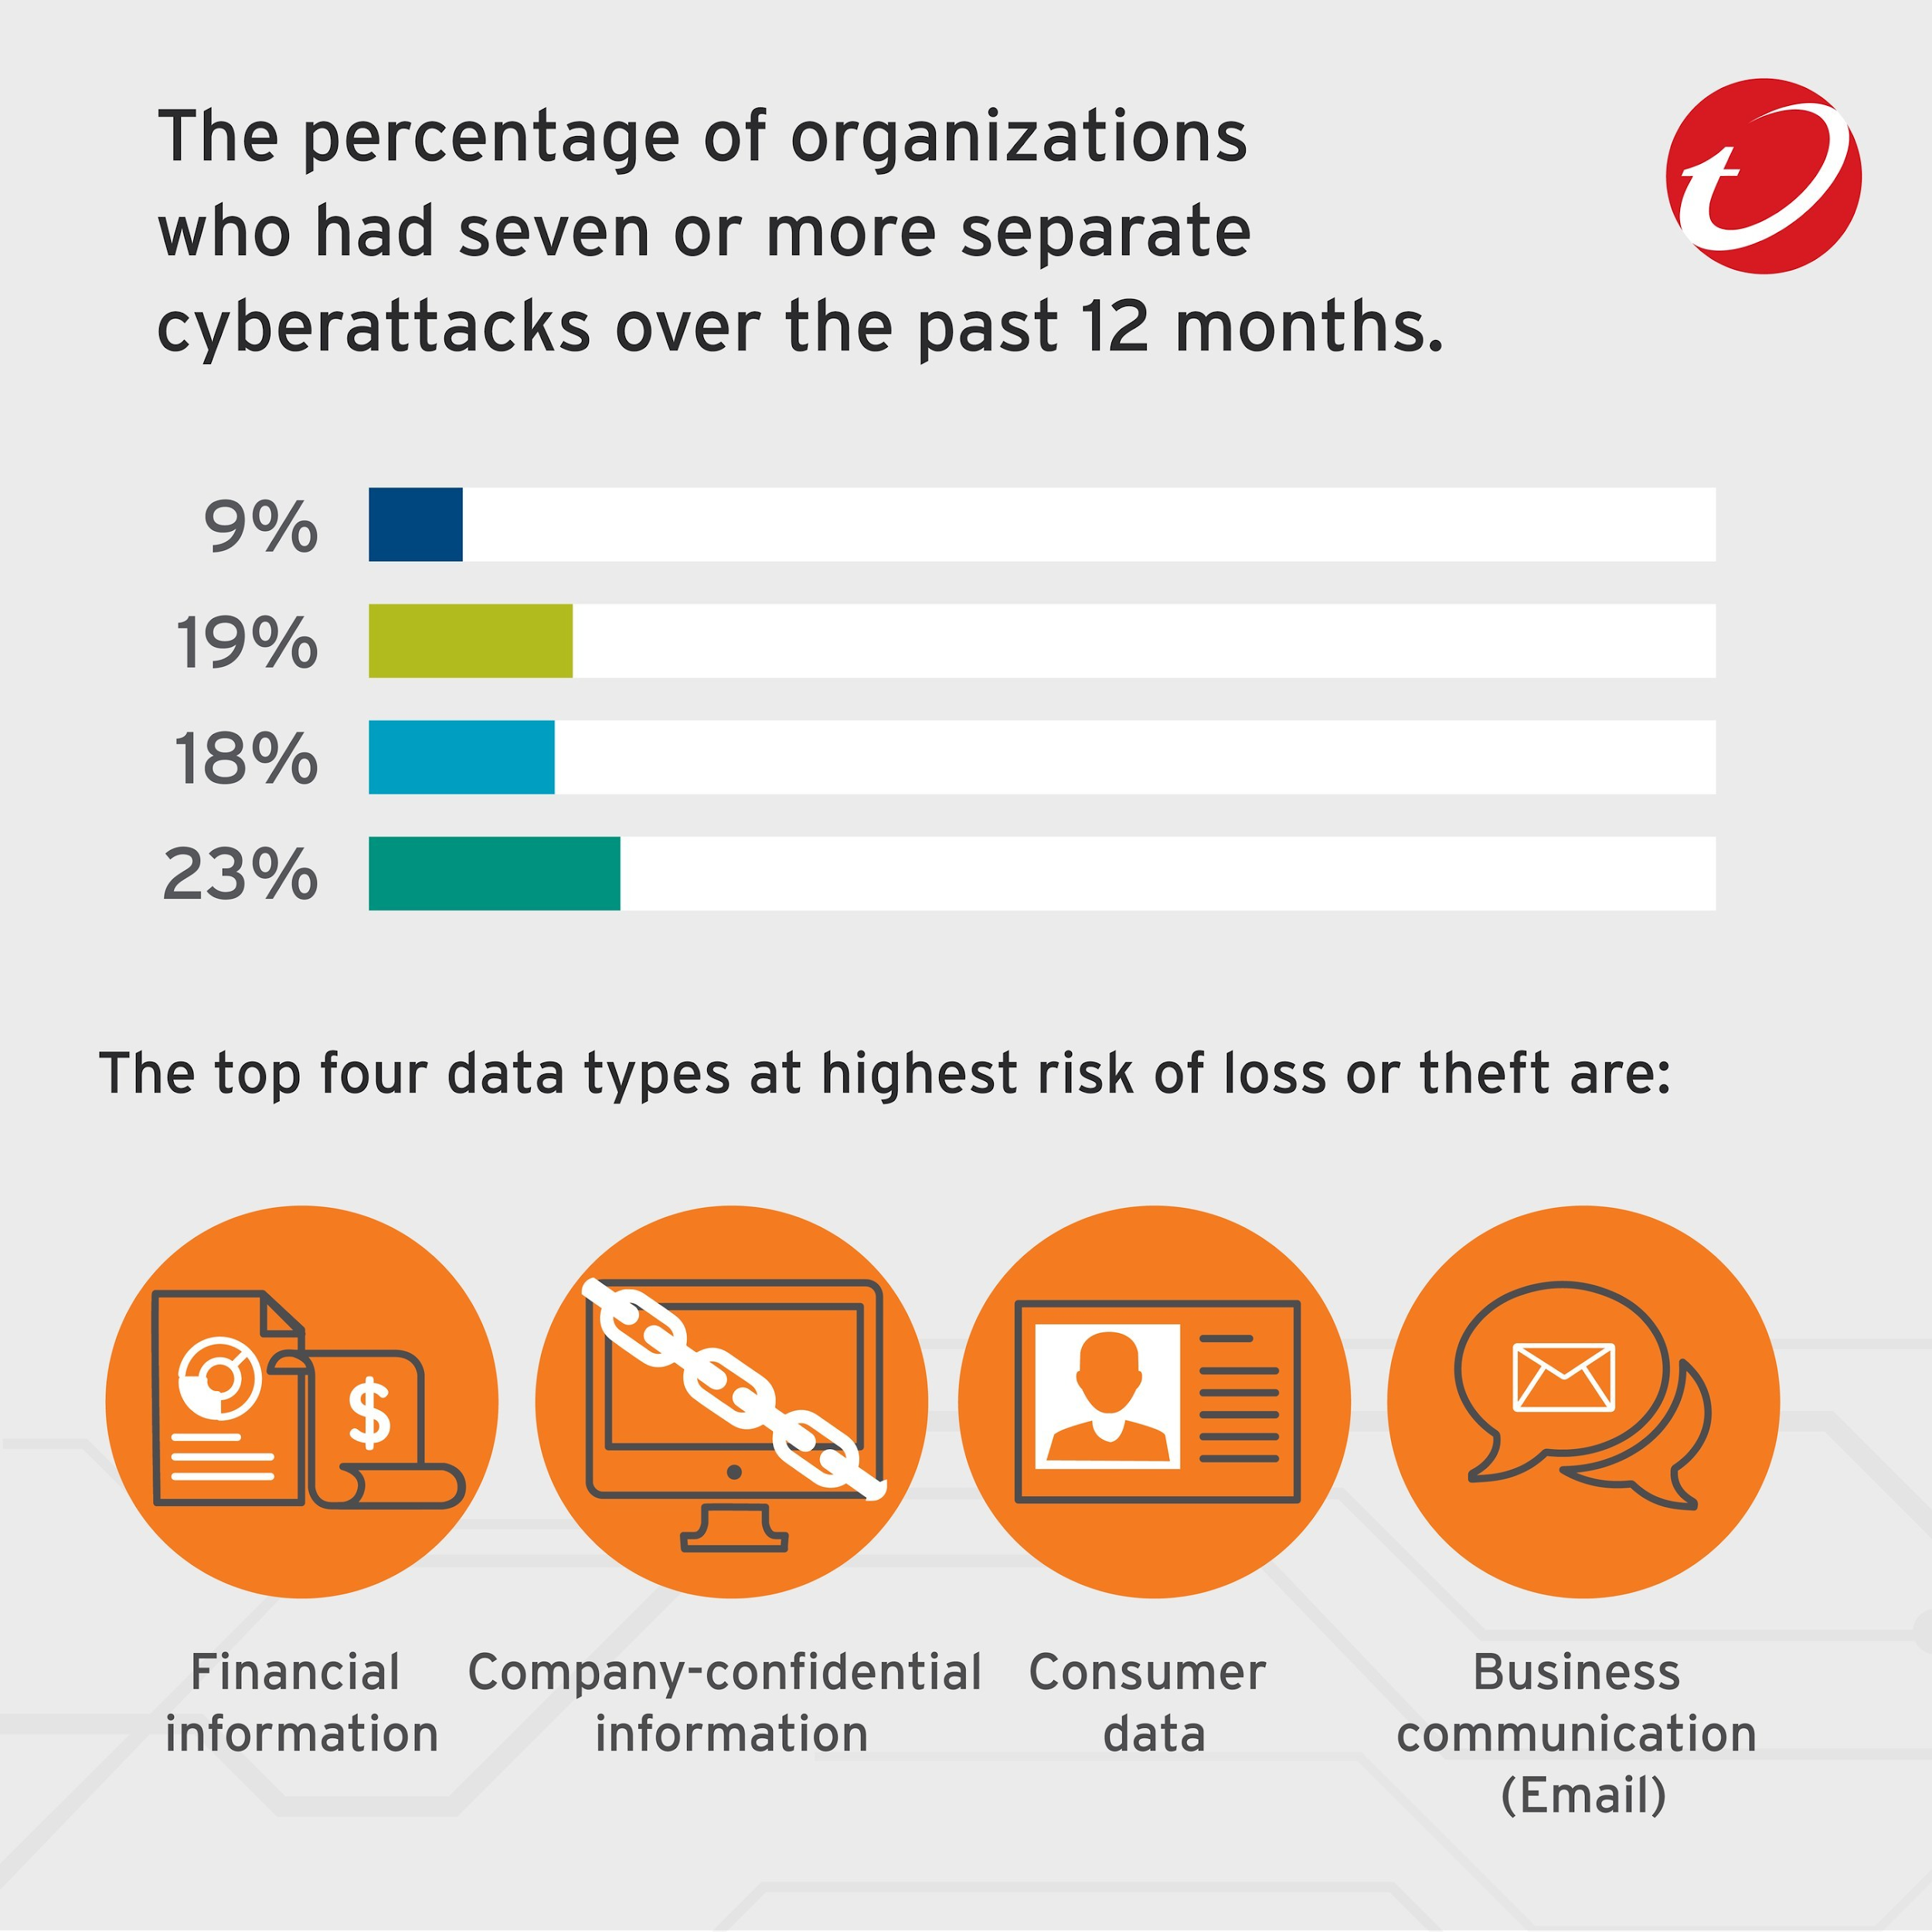 The percentage of organizations who hd seven or more separate cyberattacks over the past 12 months